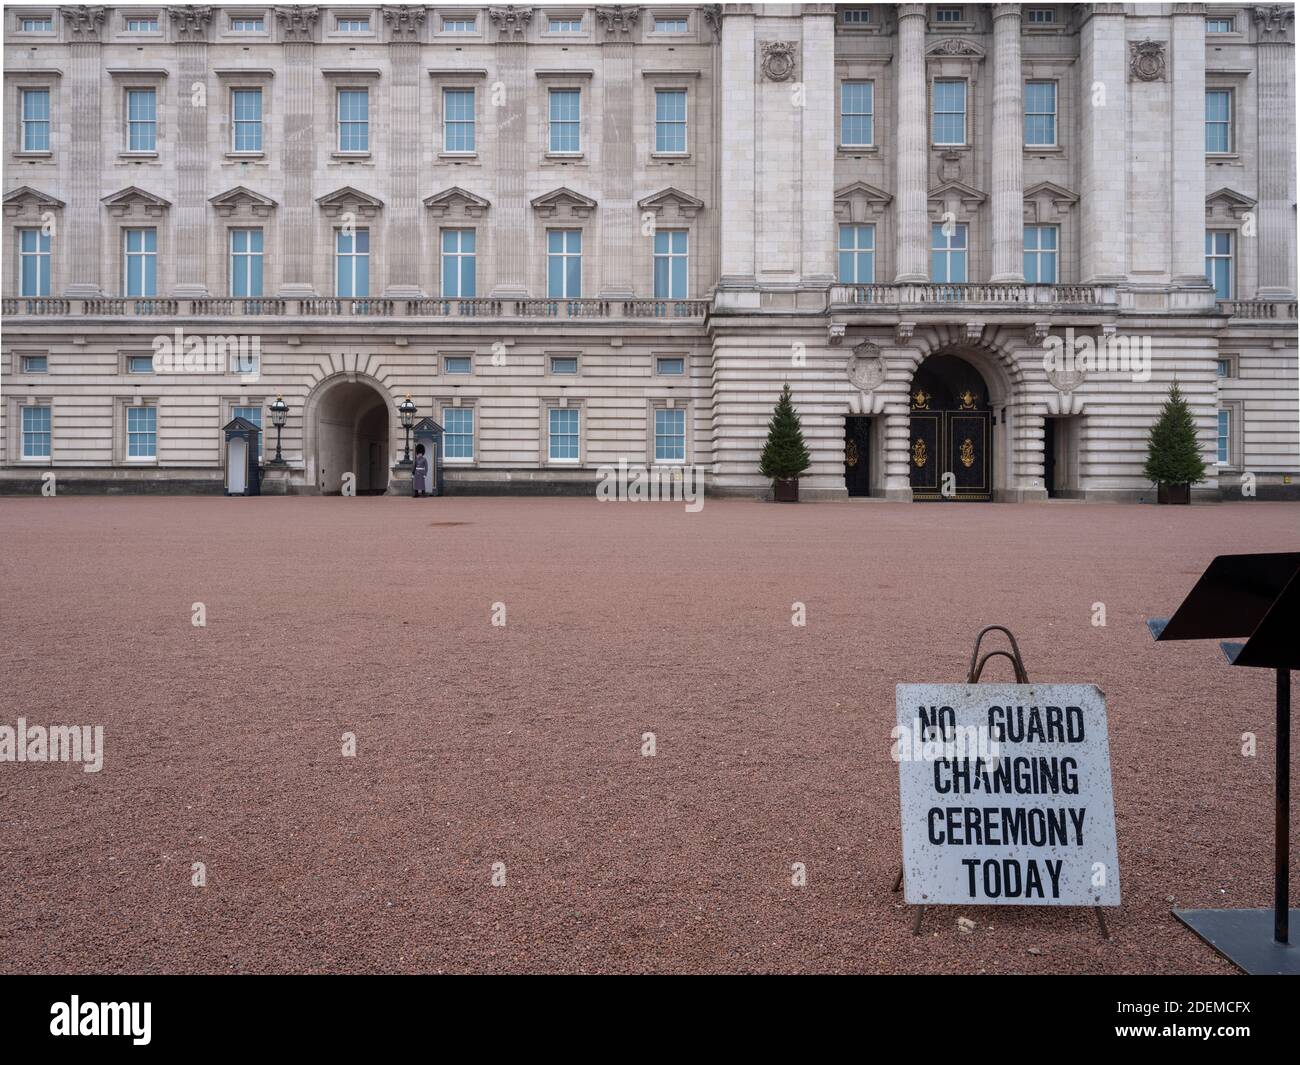 GREAT BRITAIN / England / London / Buckingham Palace, London, with guard during second lockdown and sign No guard changing ceremony today. Stock Photo